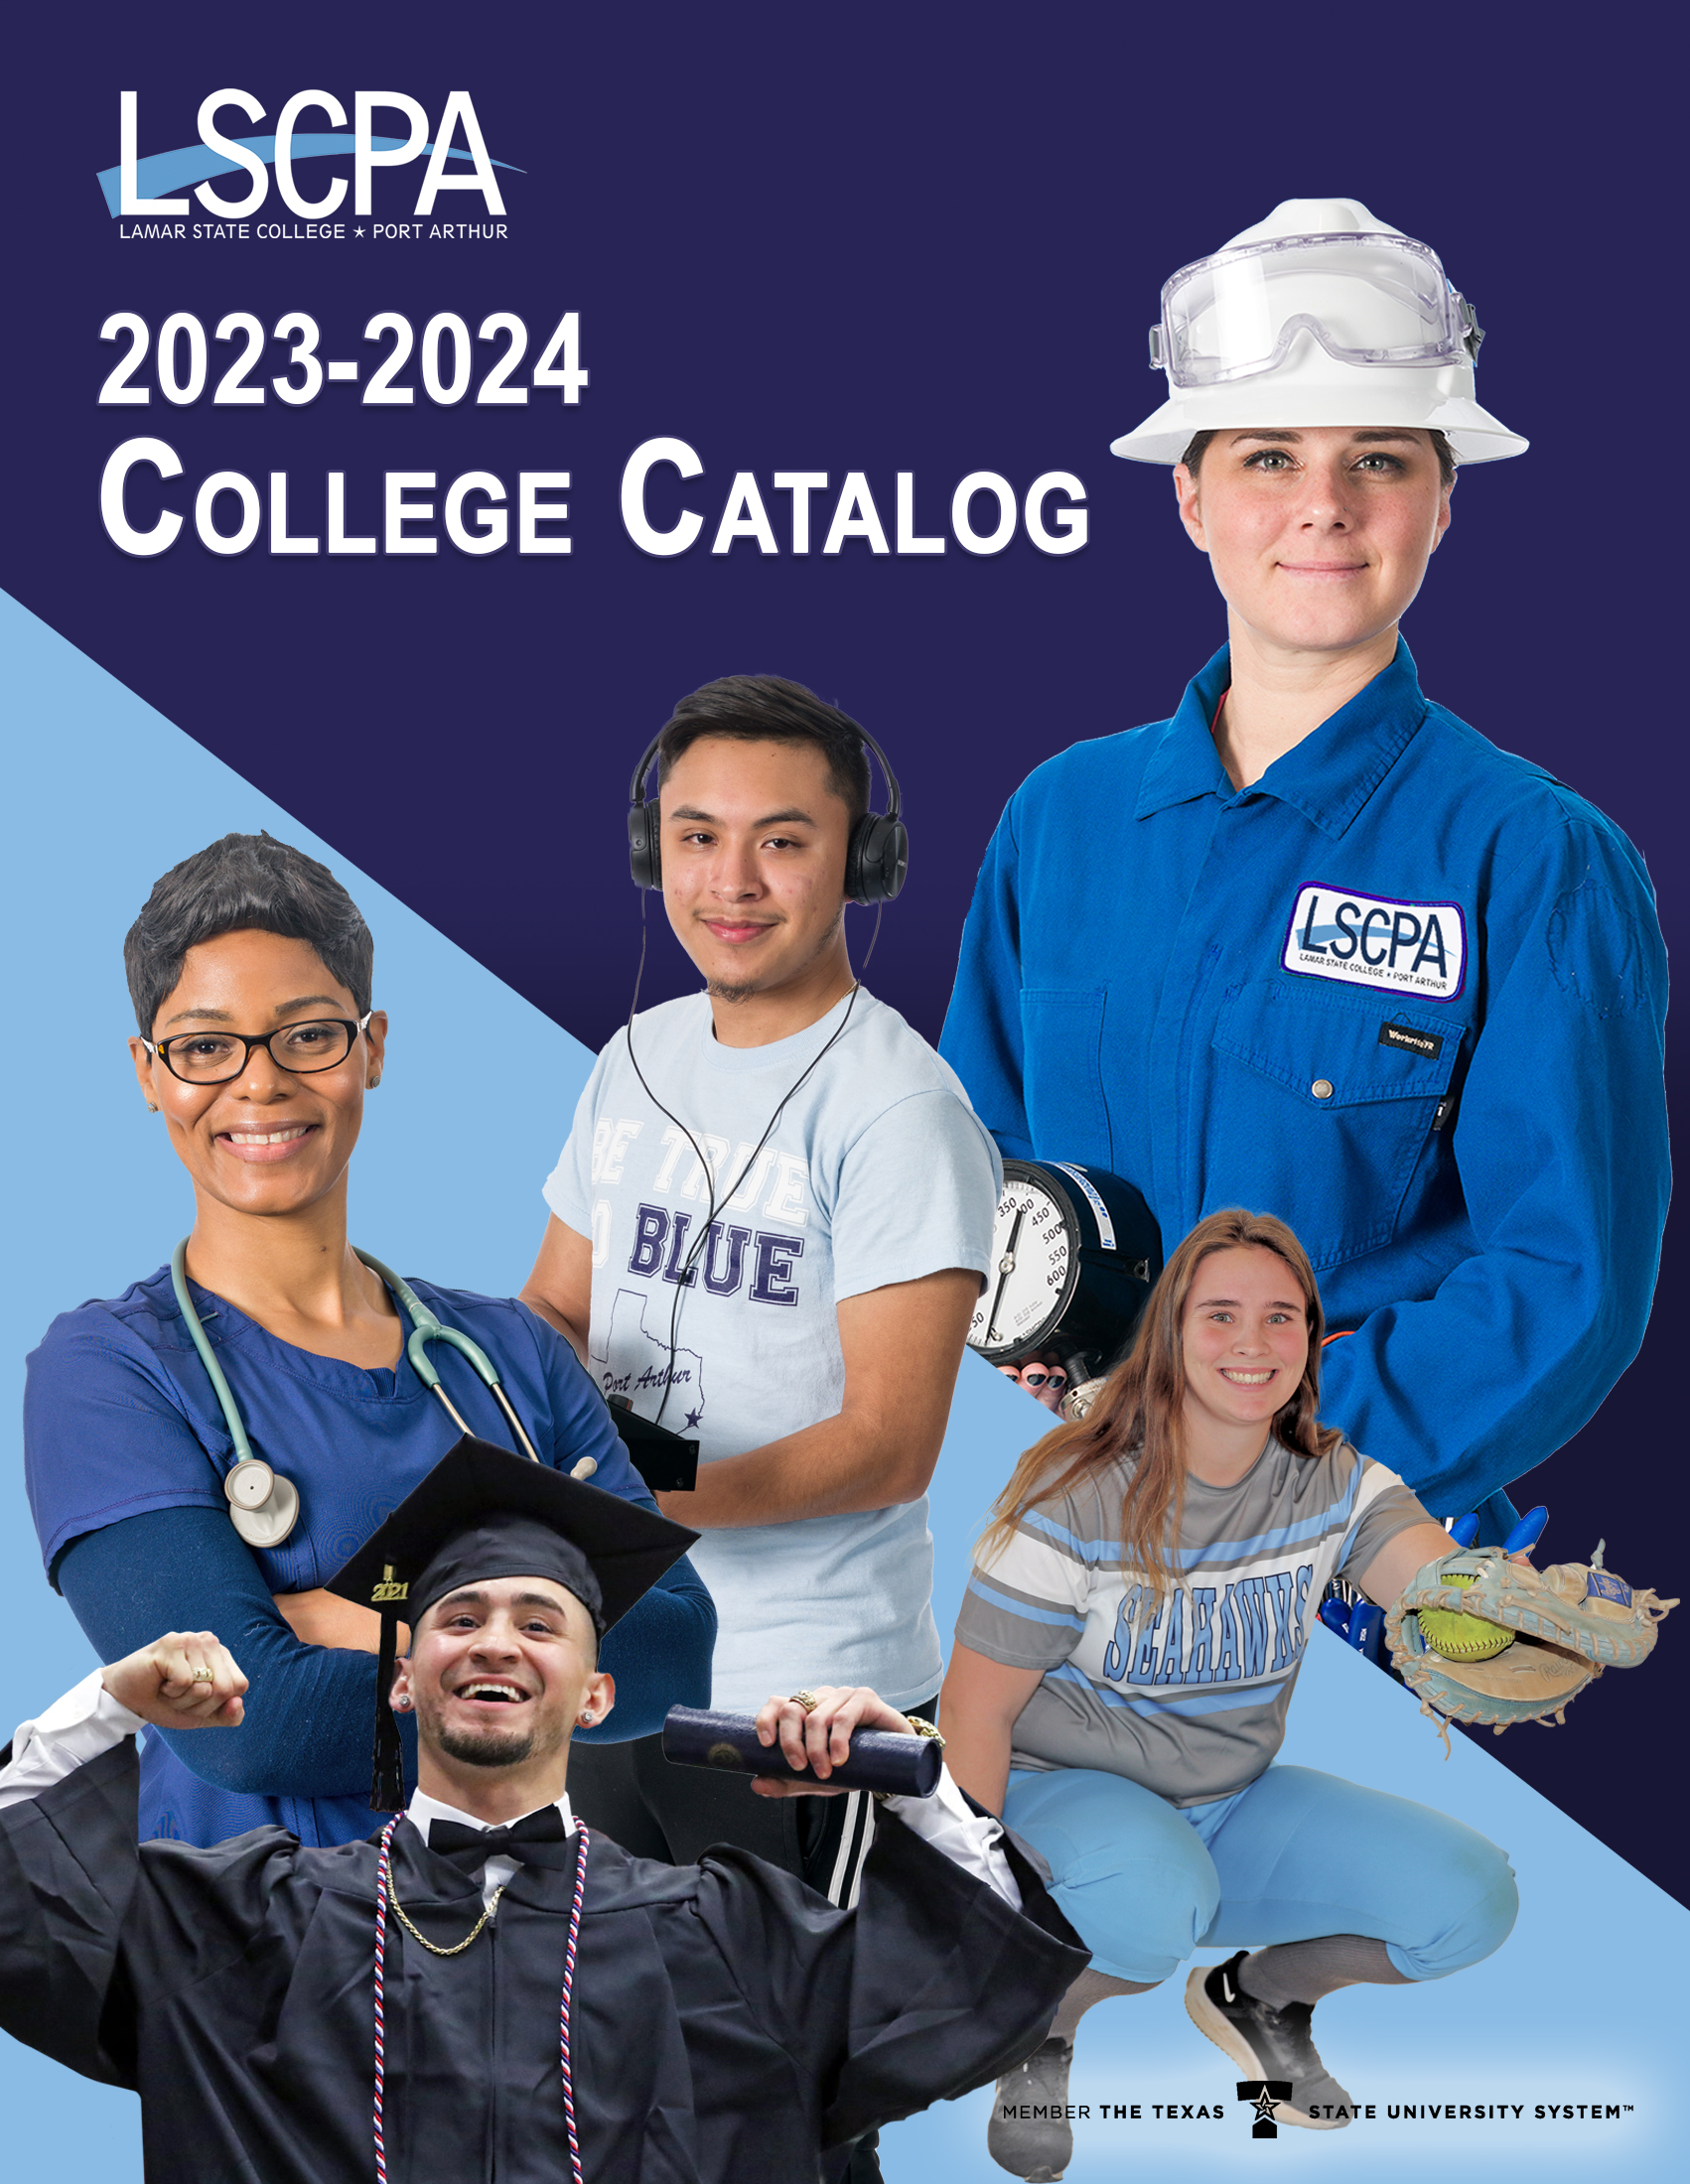 LSCPA 2023-2024 College Catalog with students